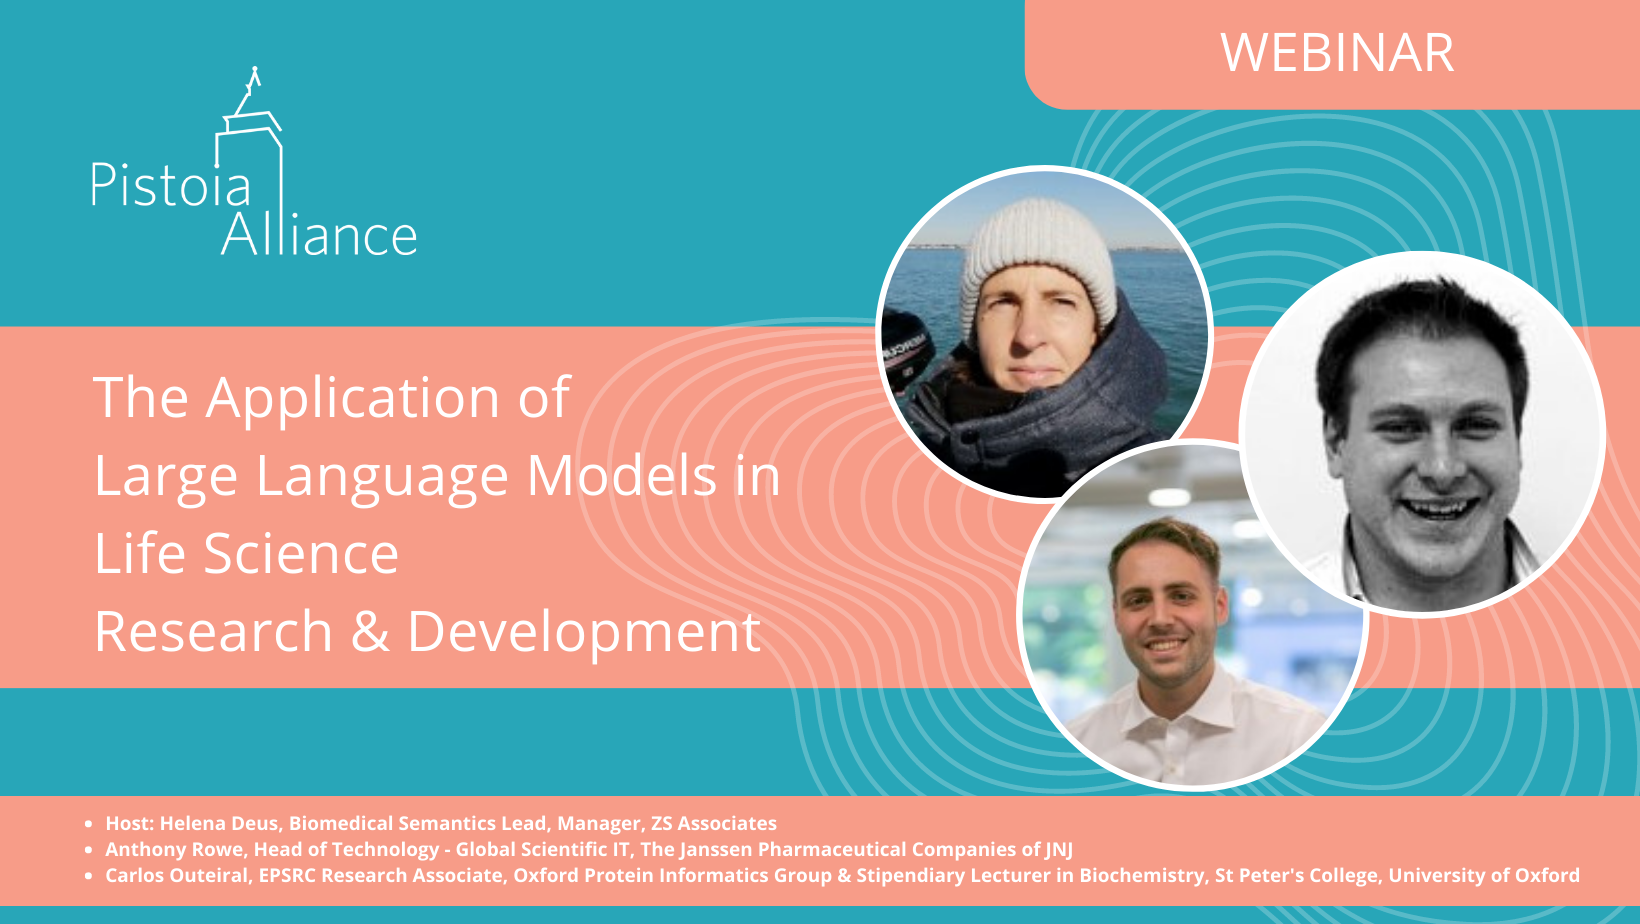 The Application of Large Language Models in Life Science R&D